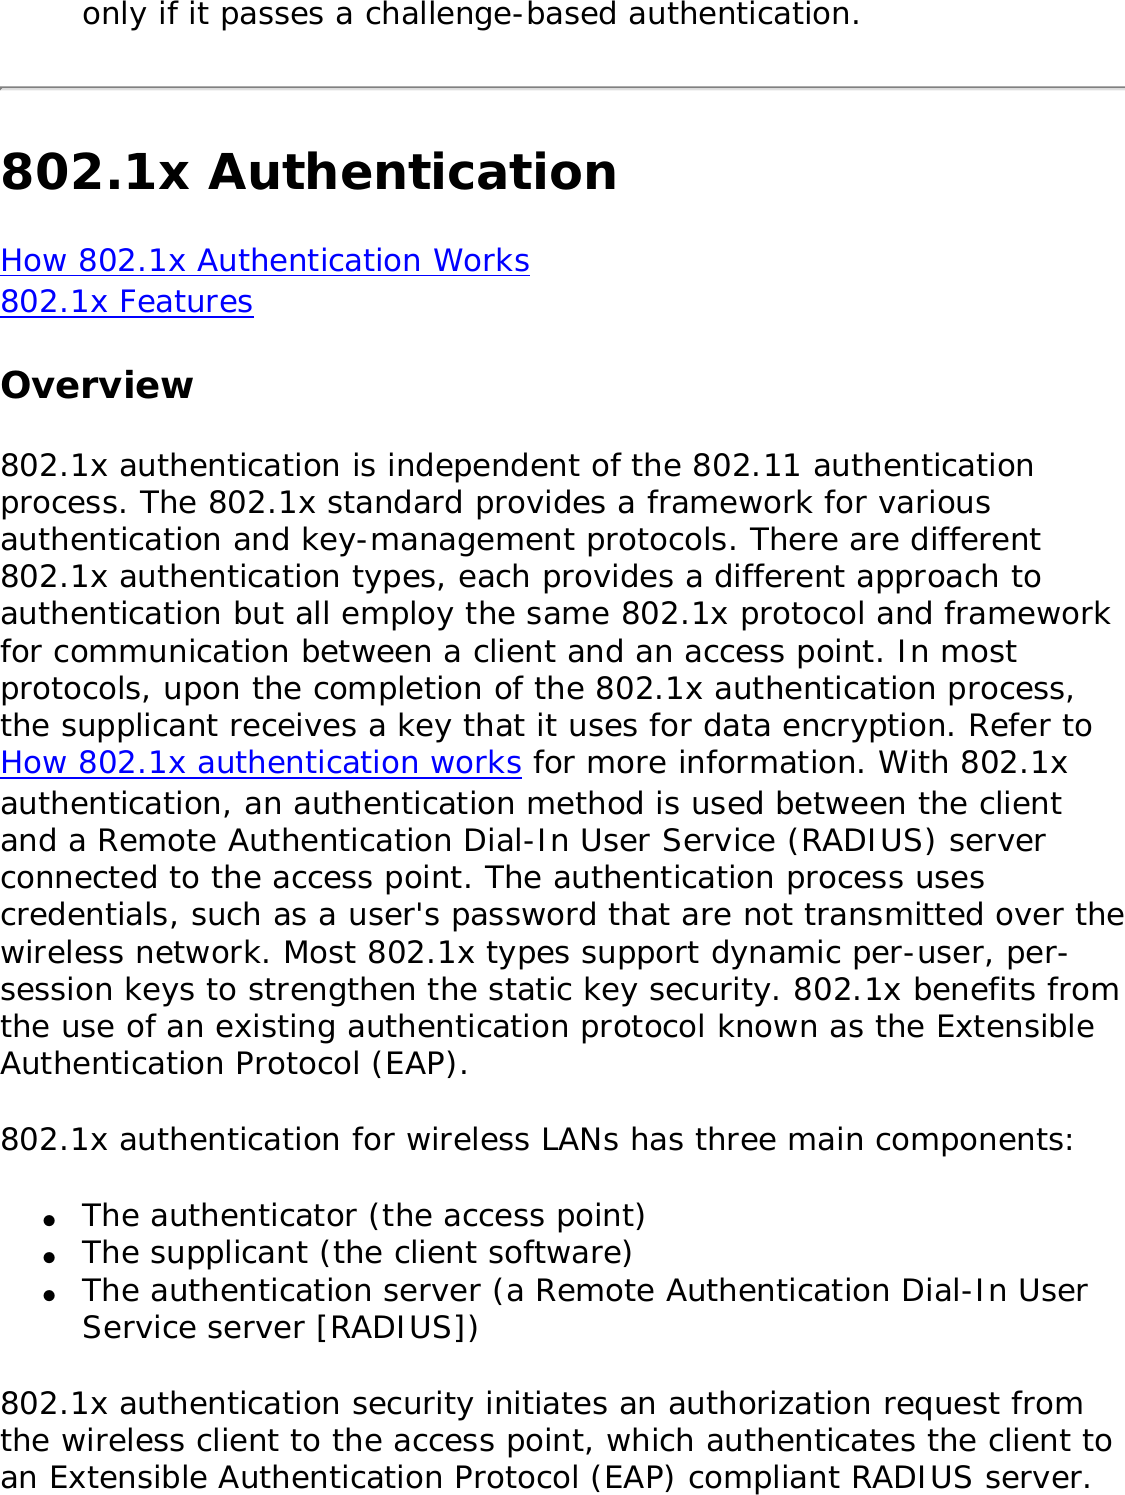 only if it passes a challenge-based authentication.802.1x AuthenticationHow 802.1x Authentication Works802.1x Features Overview802.1x authentication is independent of the 802.11 authentication process. The 802.1x standard provides a framework for various authentication and key-management protocols. There are different 802.1x authentication types, each provides a different approach to authentication but all employ the same 802.1x protocol and framework for communication between a client and an access point. In most protocols, upon the completion of the 802.1x authentication process, the supplicant receives a key that it uses for data encryption. Refer to How 802.1x authentication works for more information. With 802.1x authentication, an authentication method is used between the client and a Remote Authentication Dial-In User Service (RADIUS) server connected to the access point. The authentication process uses credentials, such as a user&apos;s password that are not transmitted over the wireless network. Most 802.1x types support dynamic per-user, per-session keys to strengthen the static key security. 802.1x benefits from the use of an existing authentication protocol known as the Extensible Authentication Protocol (EAP). 802.1x authentication for wireless LANs has three main components: ●     The authenticator (the access point)●     The supplicant (the client software)●     The authentication server (a Remote Authentication Dial-In User Service server [RADIUS])802.1x authentication security initiates an authorization request from the wireless client to the access point, which authenticates the client to an Extensible Authentication Protocol (EAP) compliant RADIUS server. 